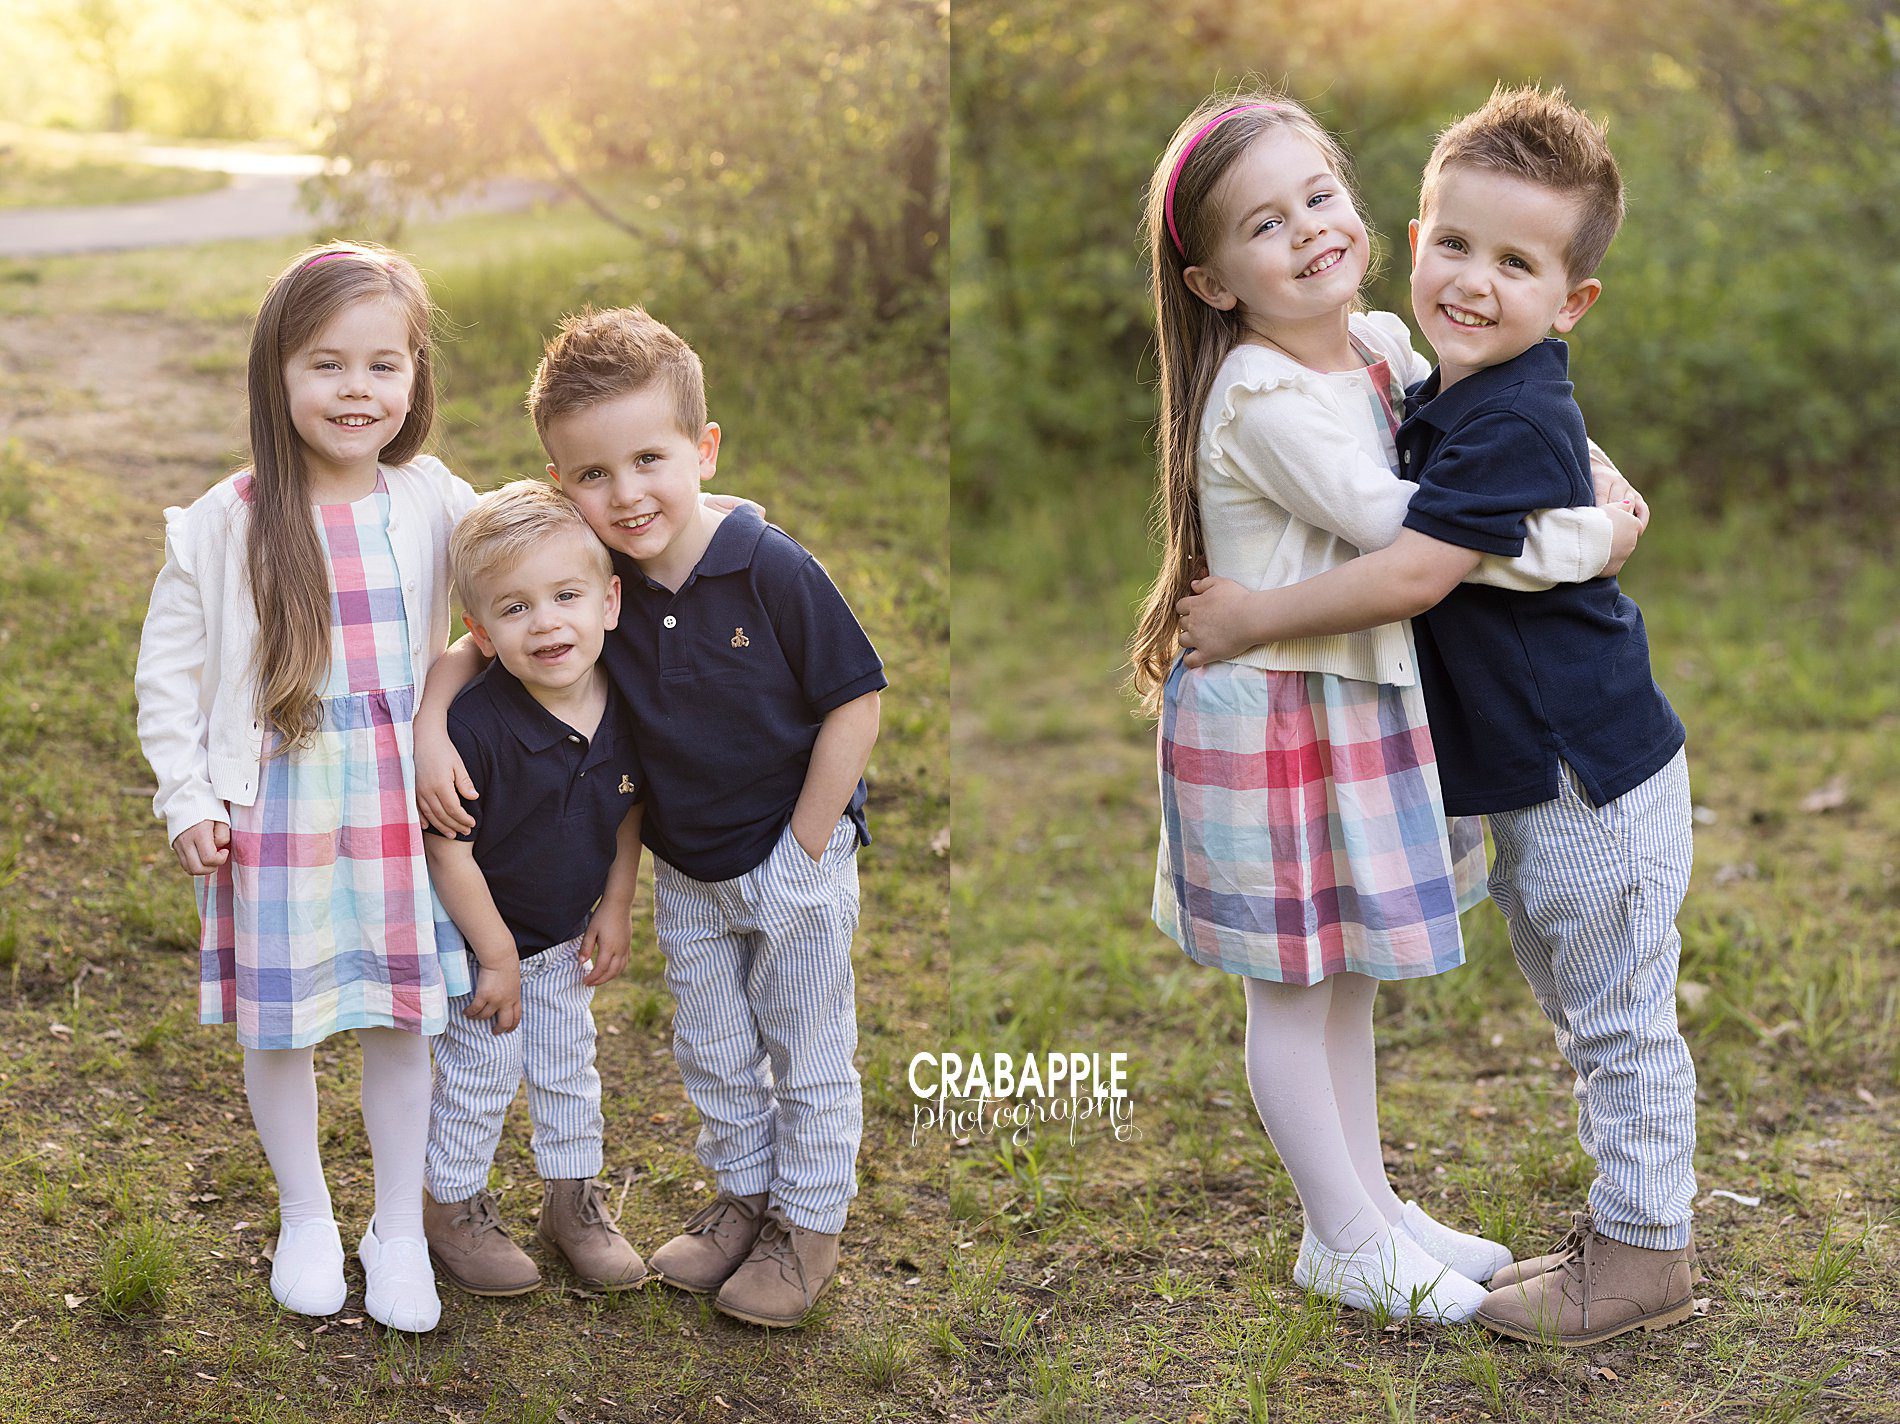 Sibling photo ideas outdoors during spring